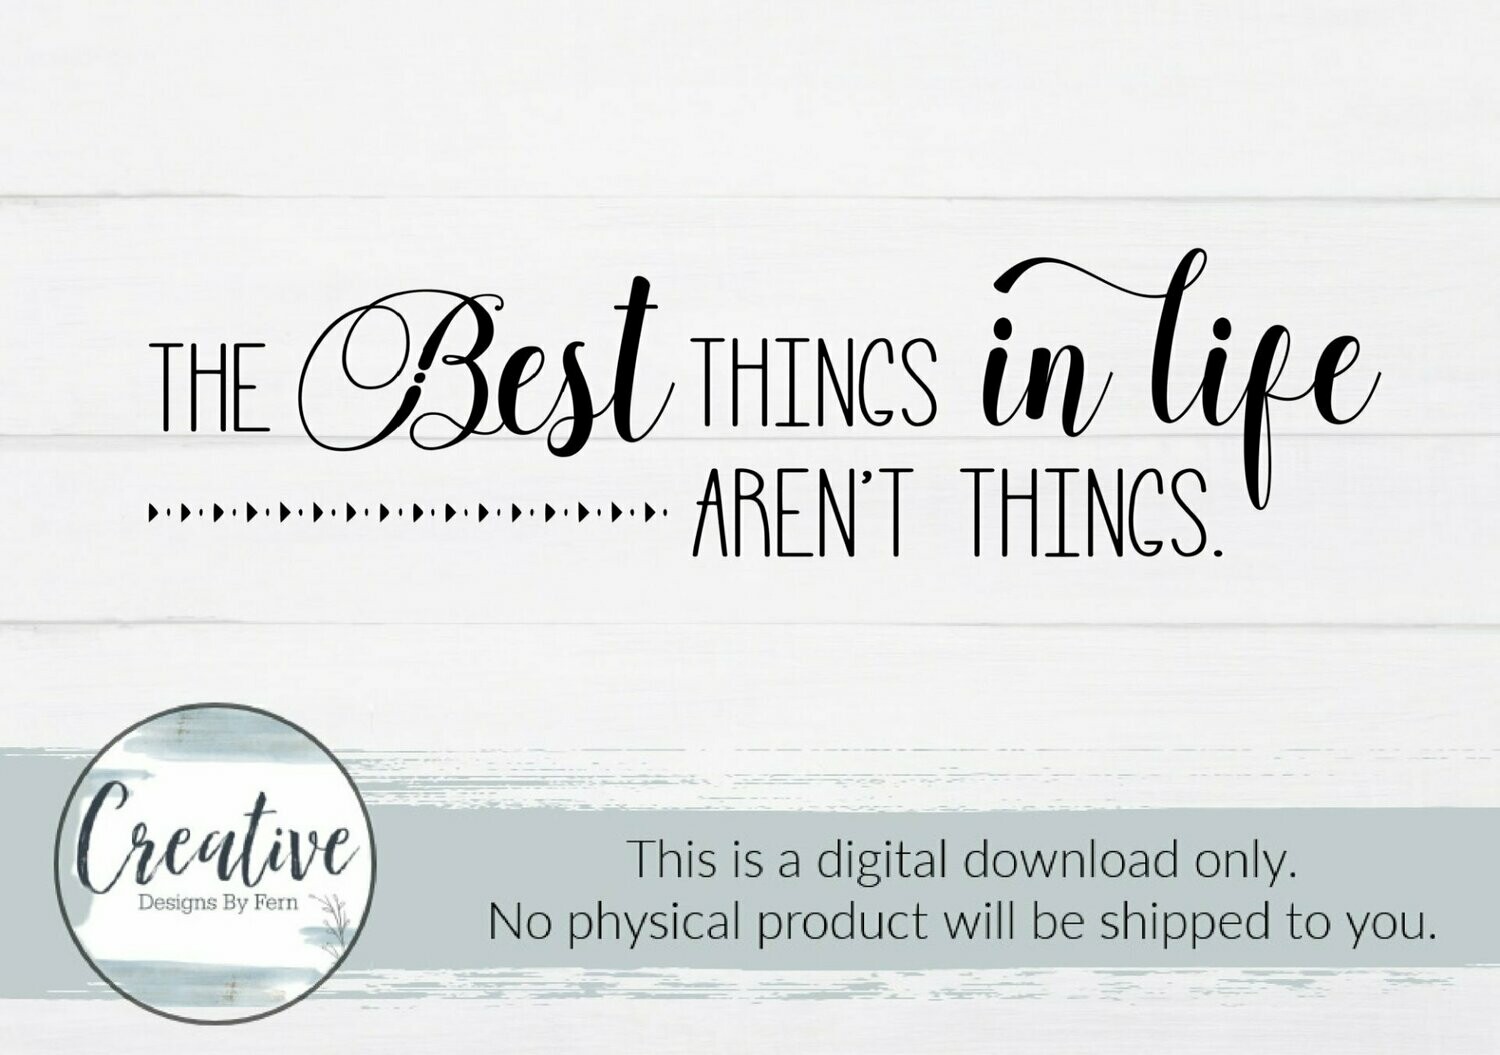 The Best Things in Life Aren't Things (Digital Download)